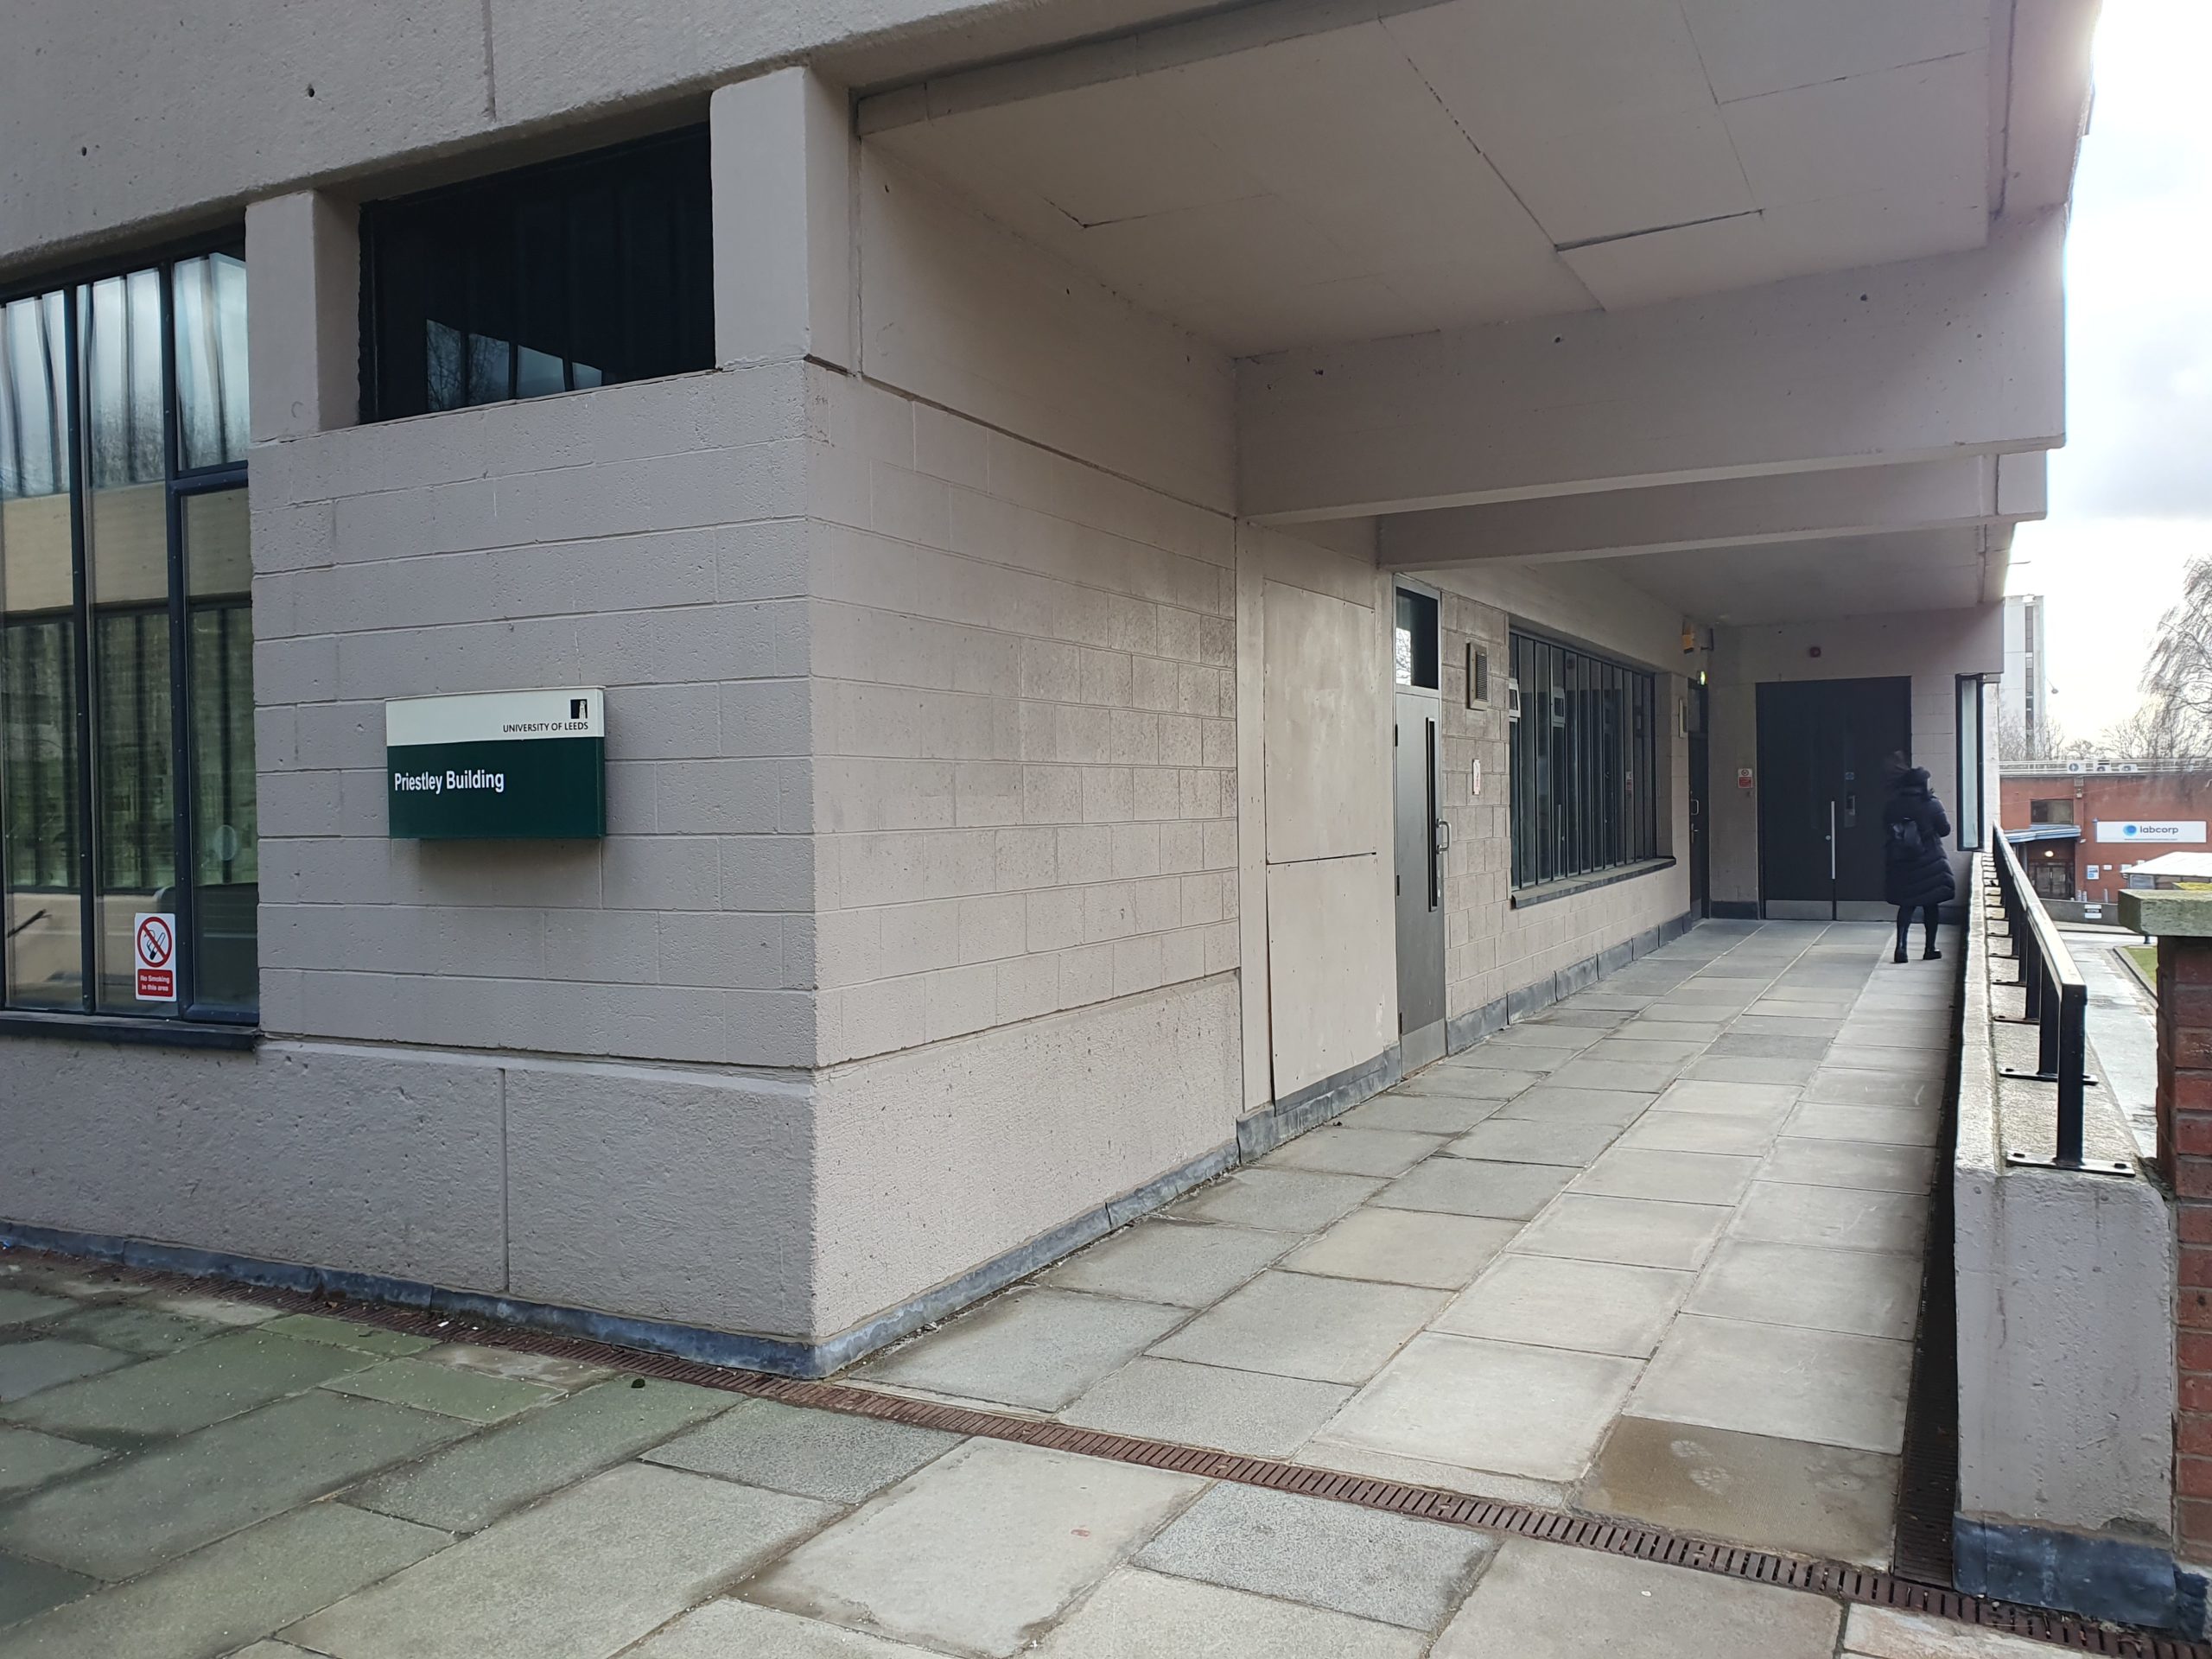 Entrance to the Priestley Building. There is a green sign reading "University of Leeds Priestley Building" to the left hand side of the entrance, with brown double doors leading into the building.